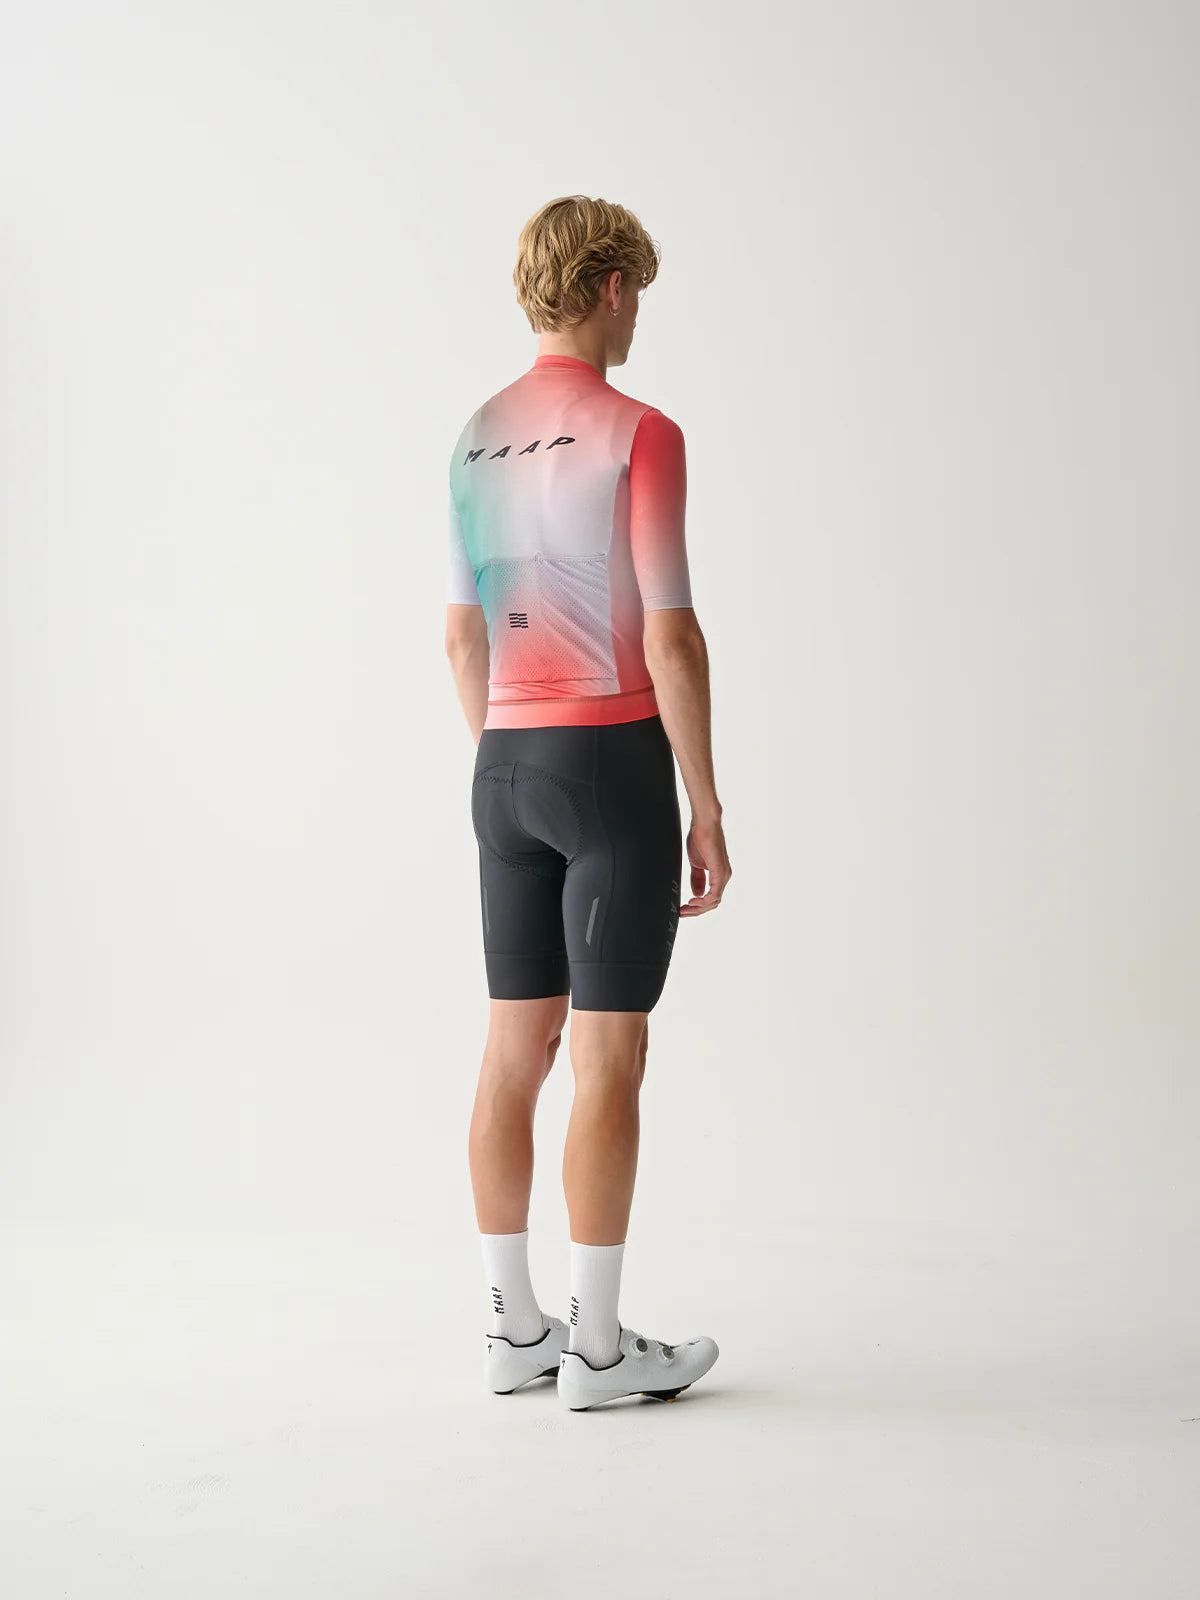 MAAP Blurred Out Pro Hex Jersey 2.0 Shell Mix | 高通気性・エアロダイナミクス・リサイクル素材 | CYCLISM